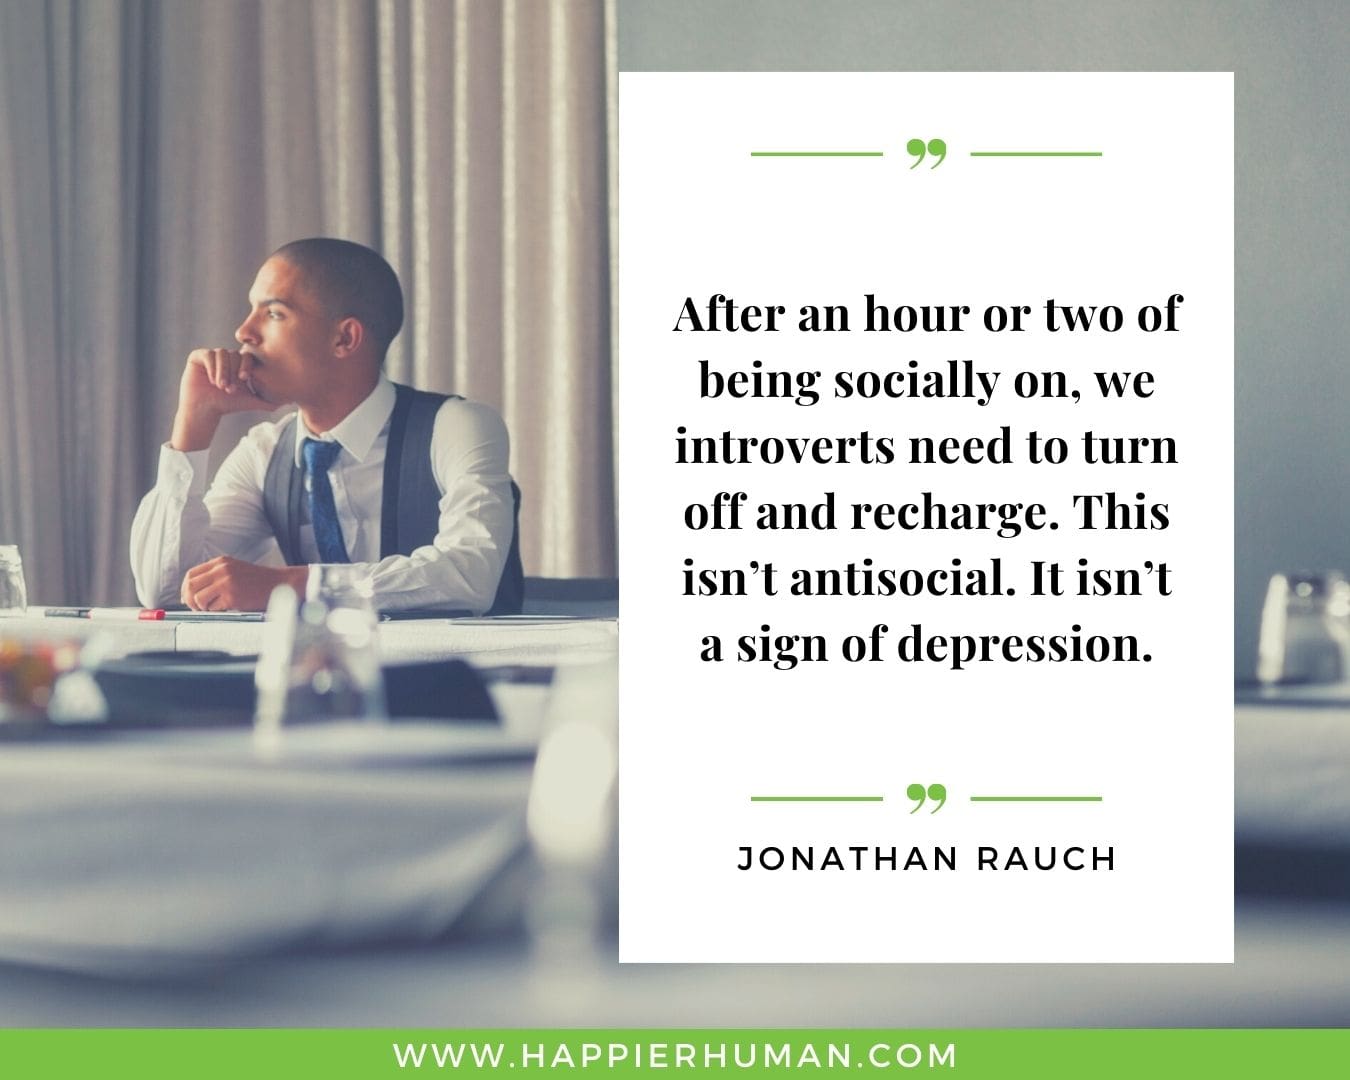 Introvert Quotes - “After an hour or two of being socially on, we introverts need to turn off and recharge. This isn’t antisocial. It isn’t a sign of depression.” – Jonathan Rauch